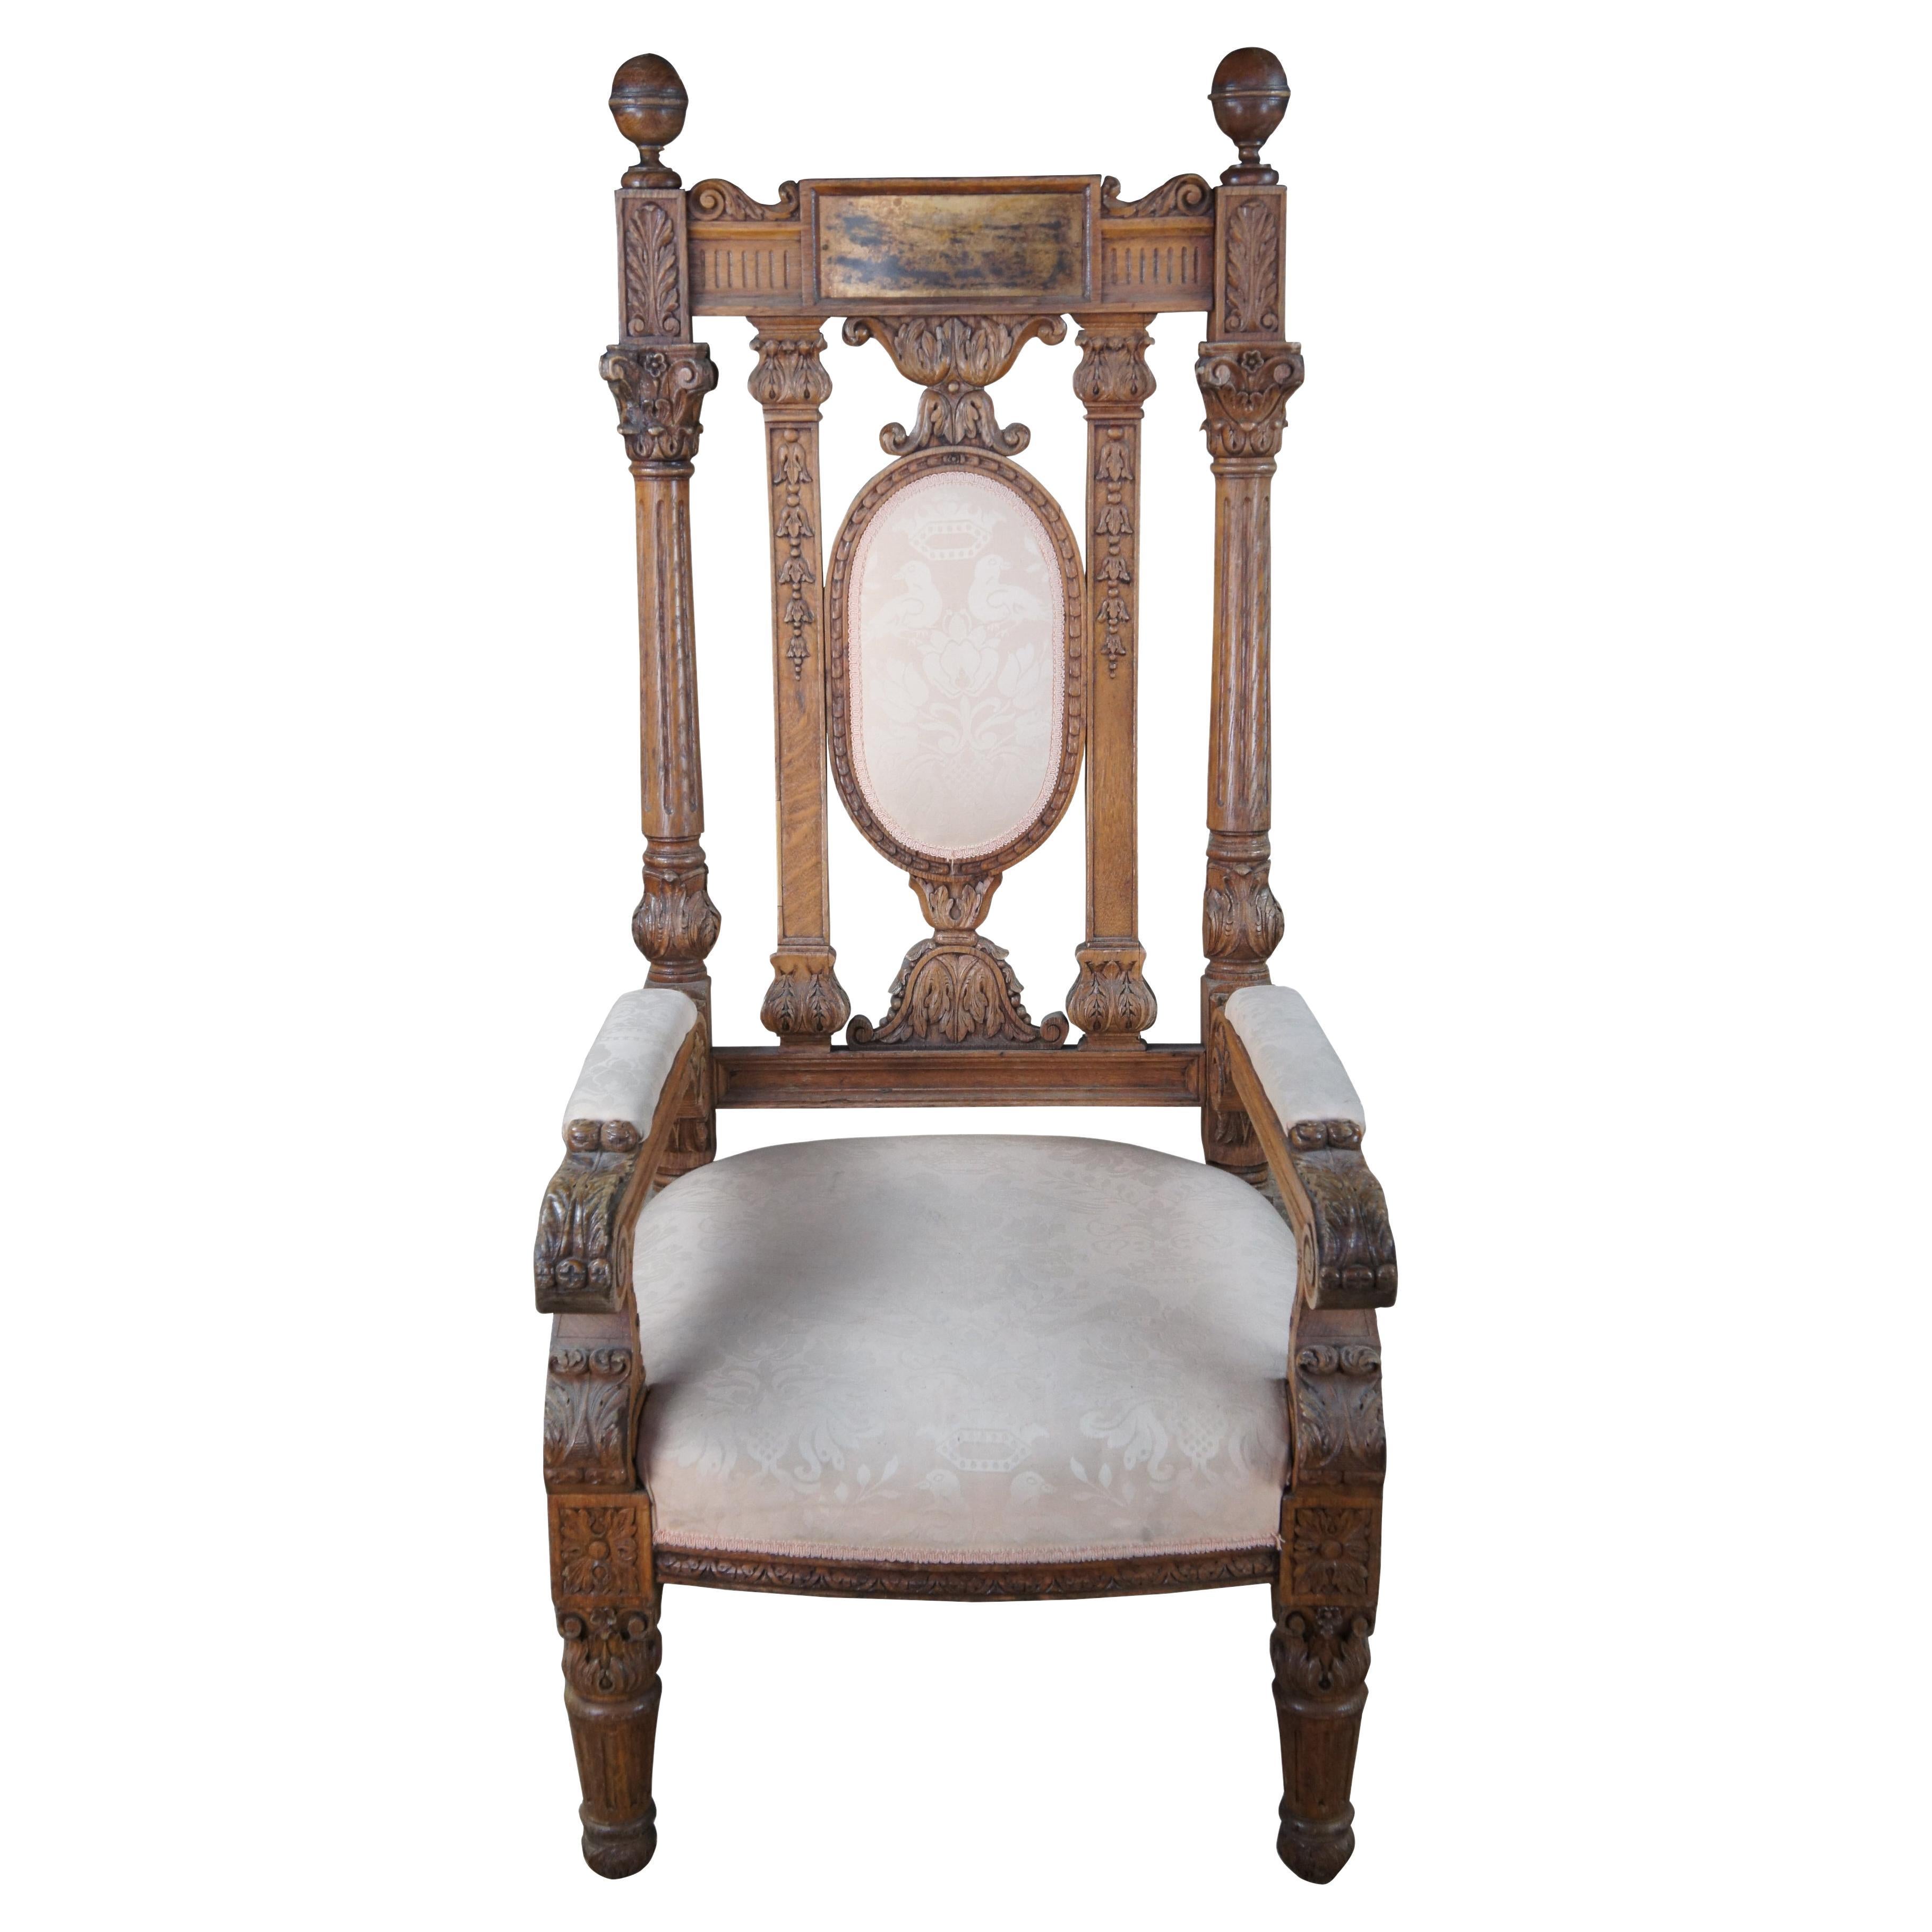 Monumental Antique Victorian Ornate Carved Oak Throne Arm Chair 58" For Sale